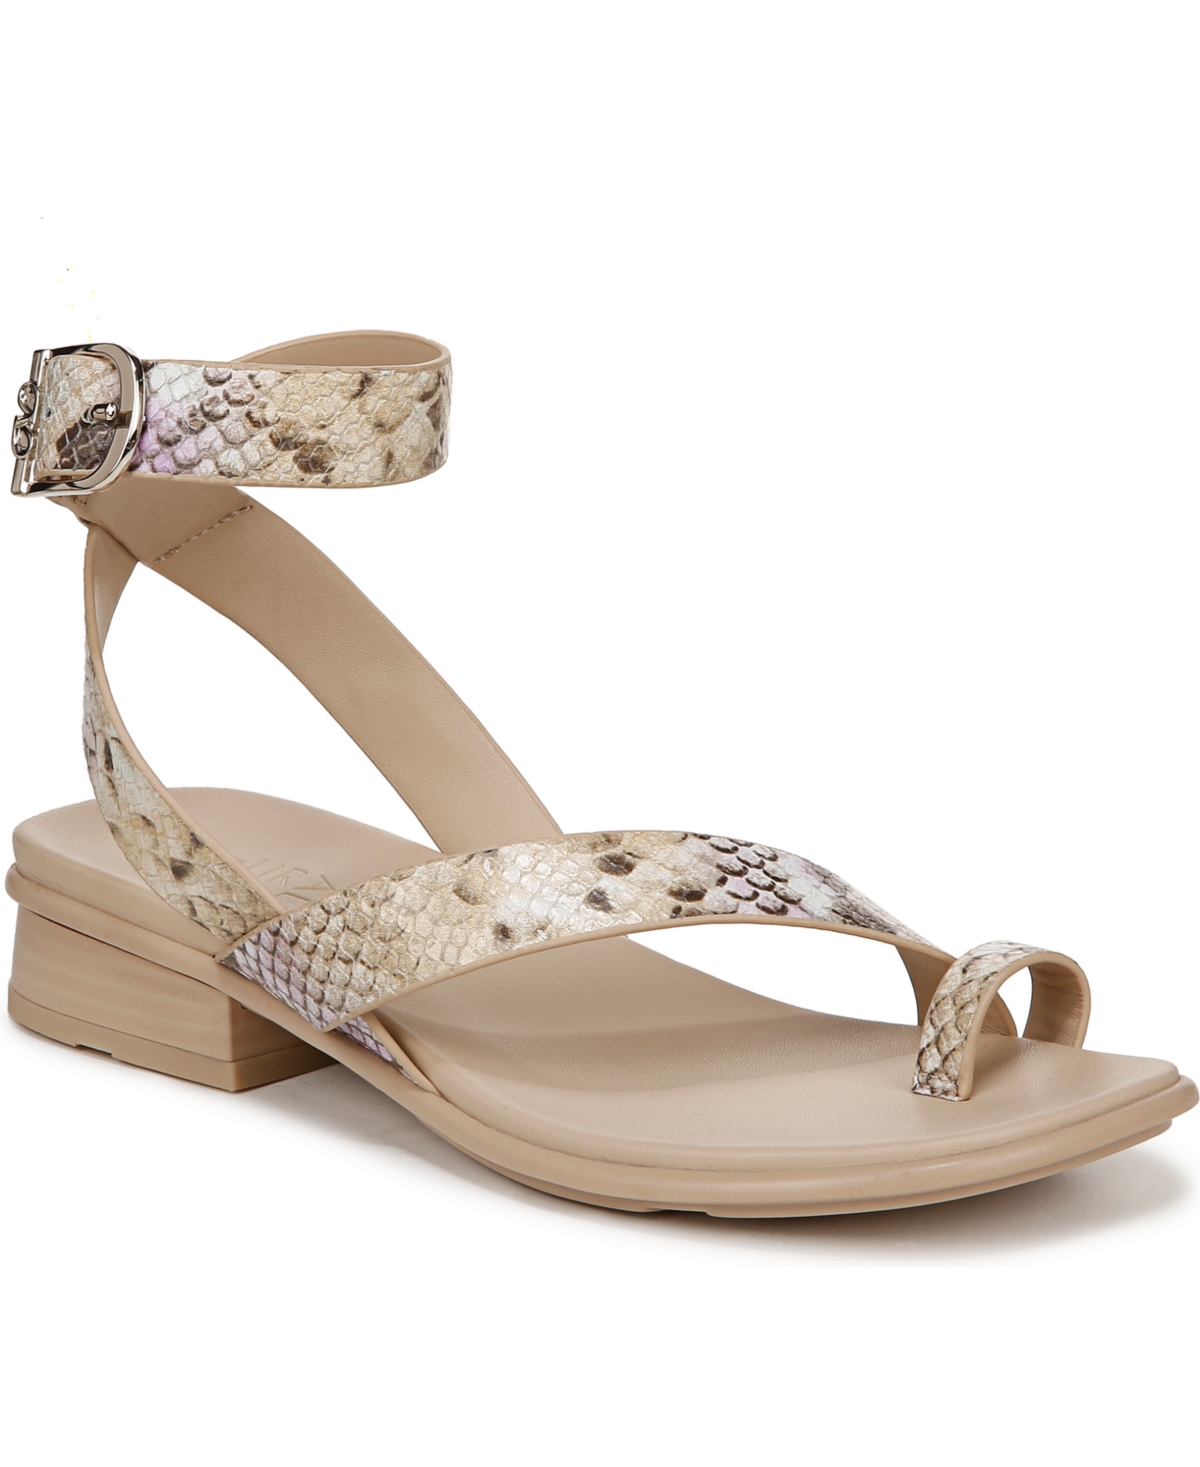 Shop Naturalizer Birch Ankle Strap Sandals In Tan,lilac Snake Print Leather